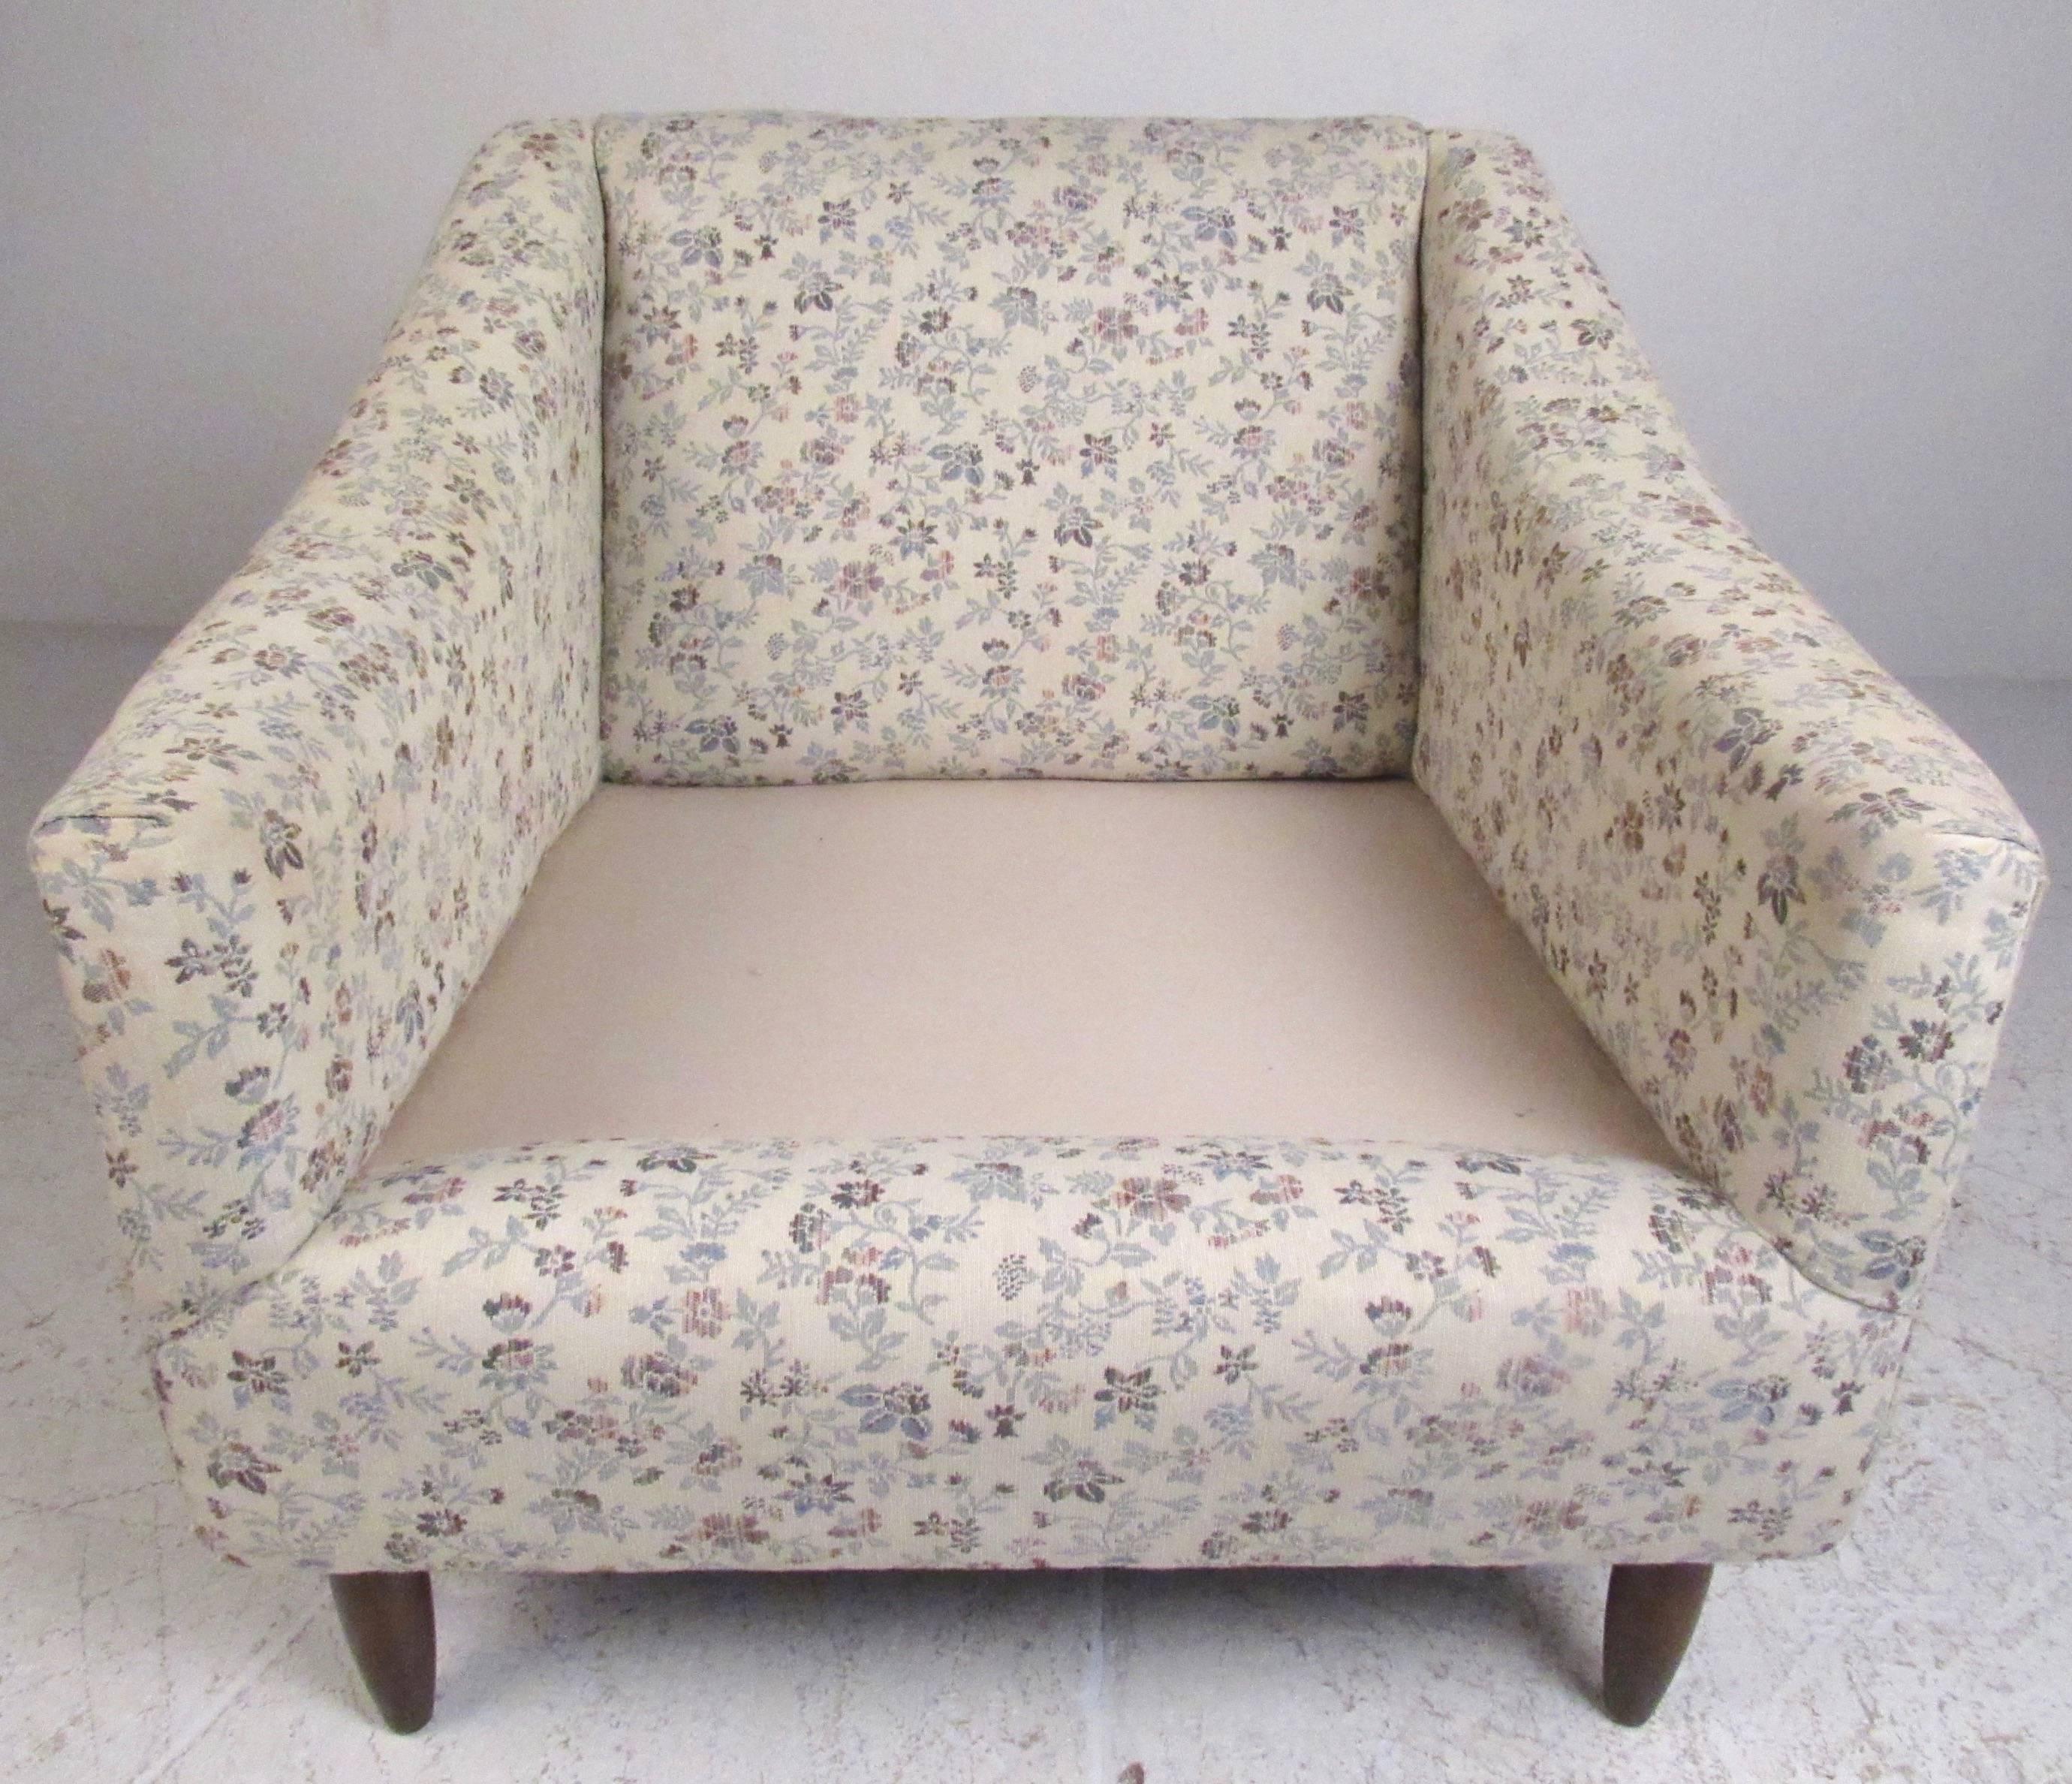 Late 20th Century Mid-Century Modern Upholstered Lounge Chairs